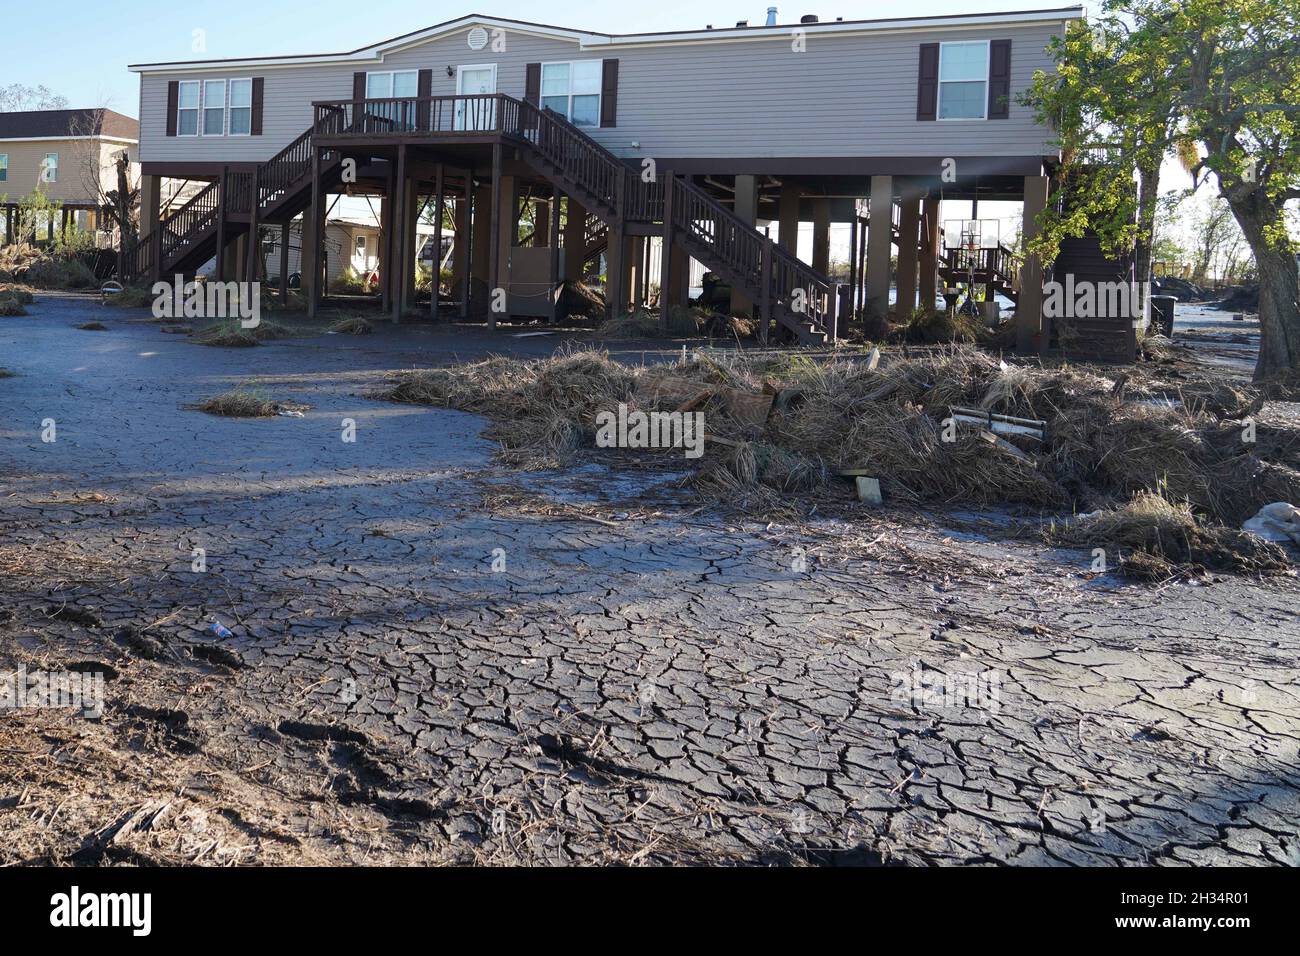 Ironton, United States of America. 24 September, 2021. Destroyed homes and buildings litter the area in the aftermath of Hurricane Ida September 24, 2021 in Ironton, Louisiana. Credit: Julie Joseph/FEMA/Alamy Live News Stock Photo